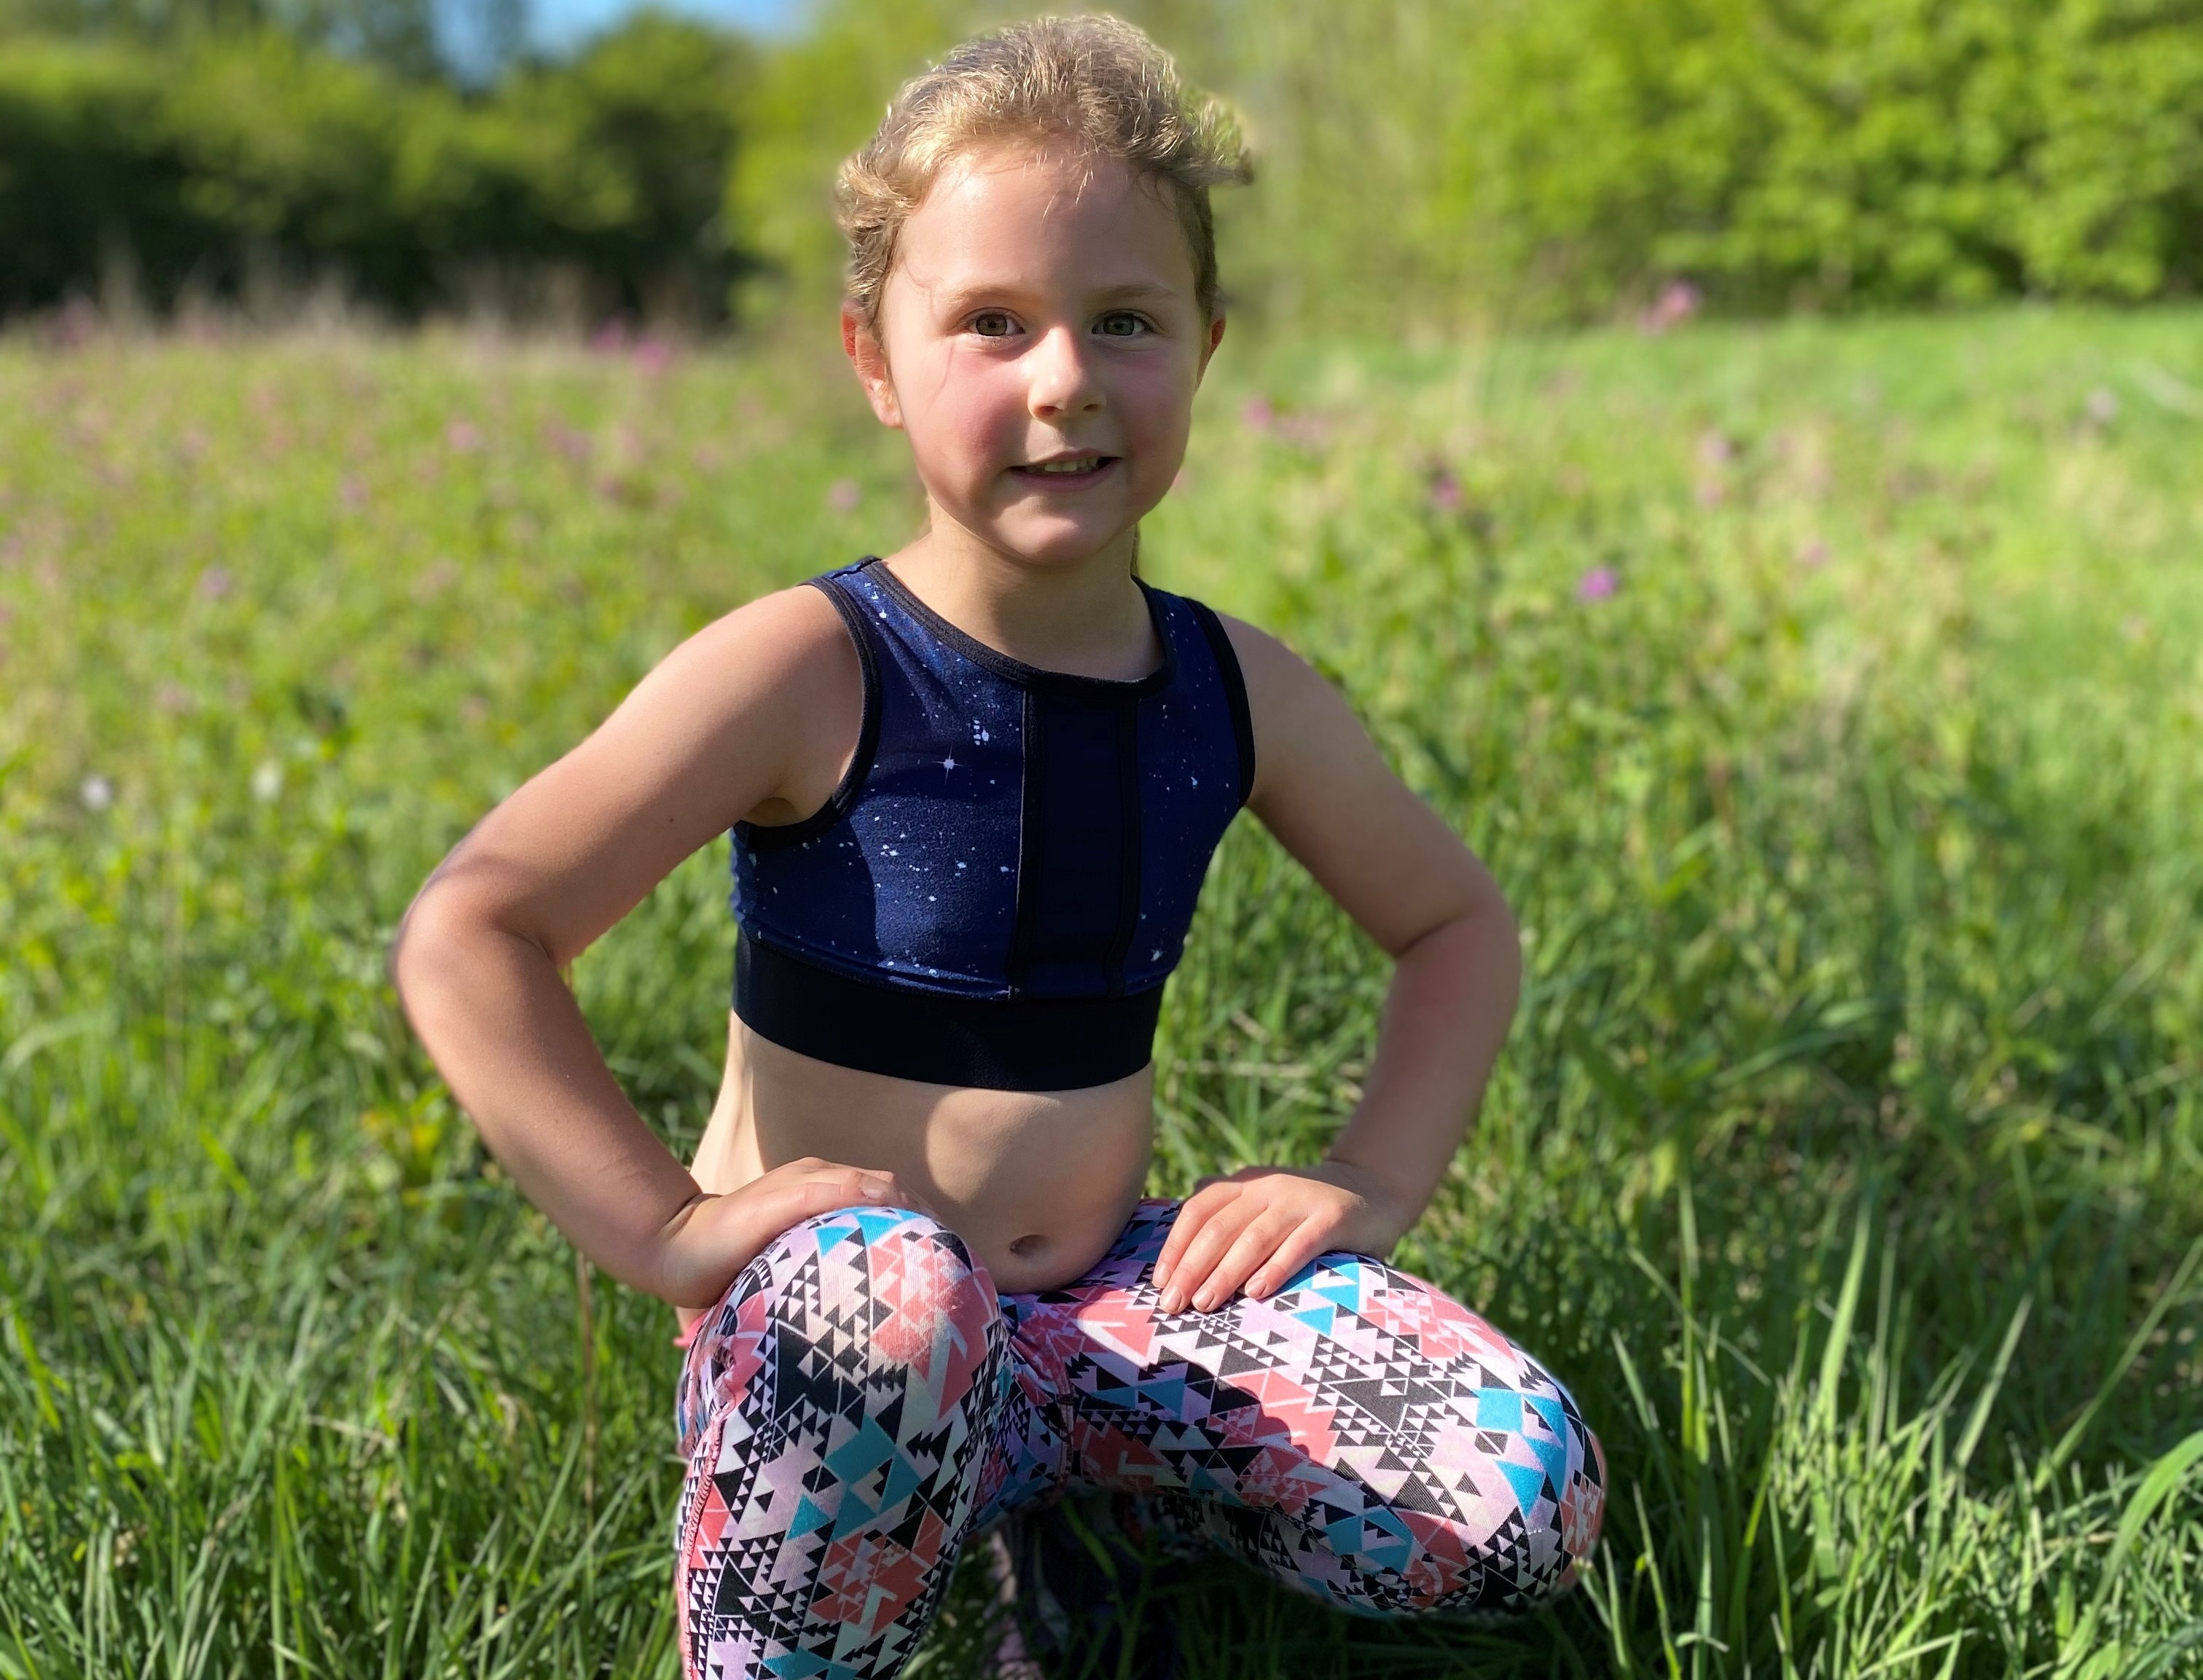 Willow in her running gear